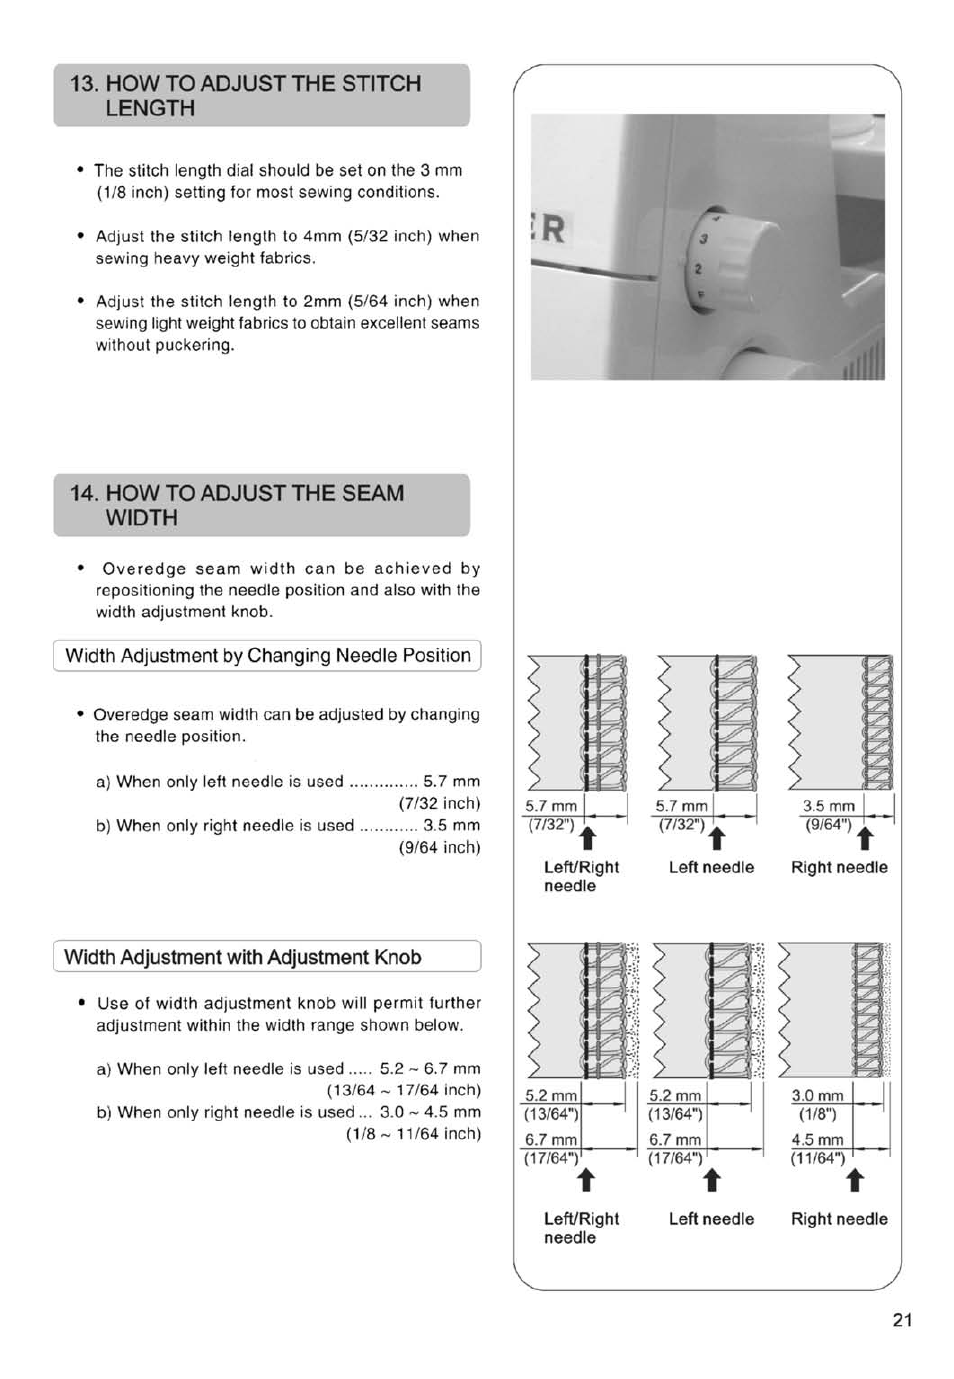 How то adjust the stitch length, How to adjust the seam width, Width adjustment with adjustment knob | How to adjust the stitch length, Л .1 | SINGER 14SH754/14CG754 User Manual | Page 22 / 53